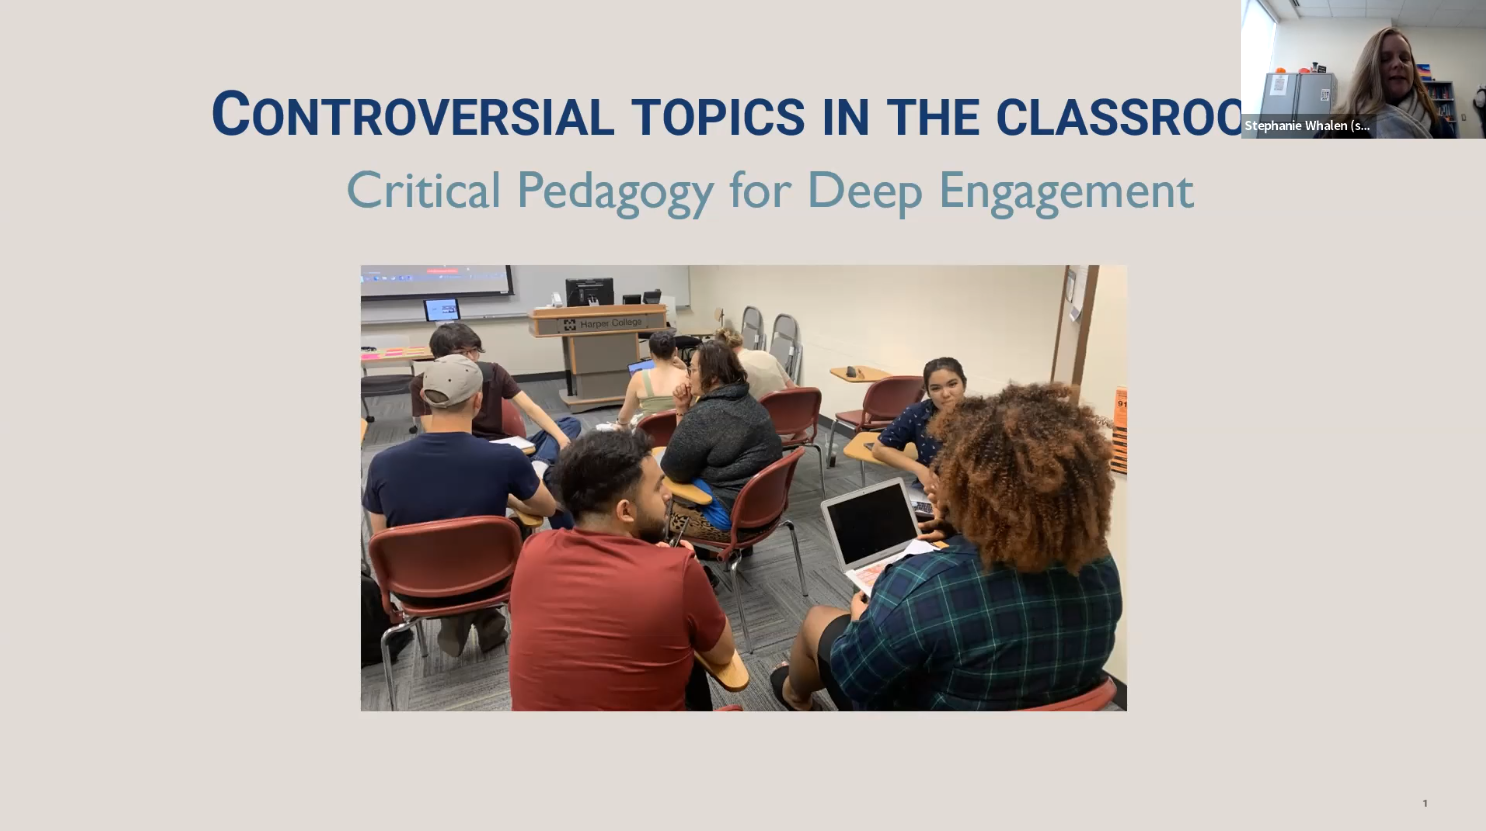 Controversial Topics in the Classroom - Critical Pedagogy for Deep Engagement